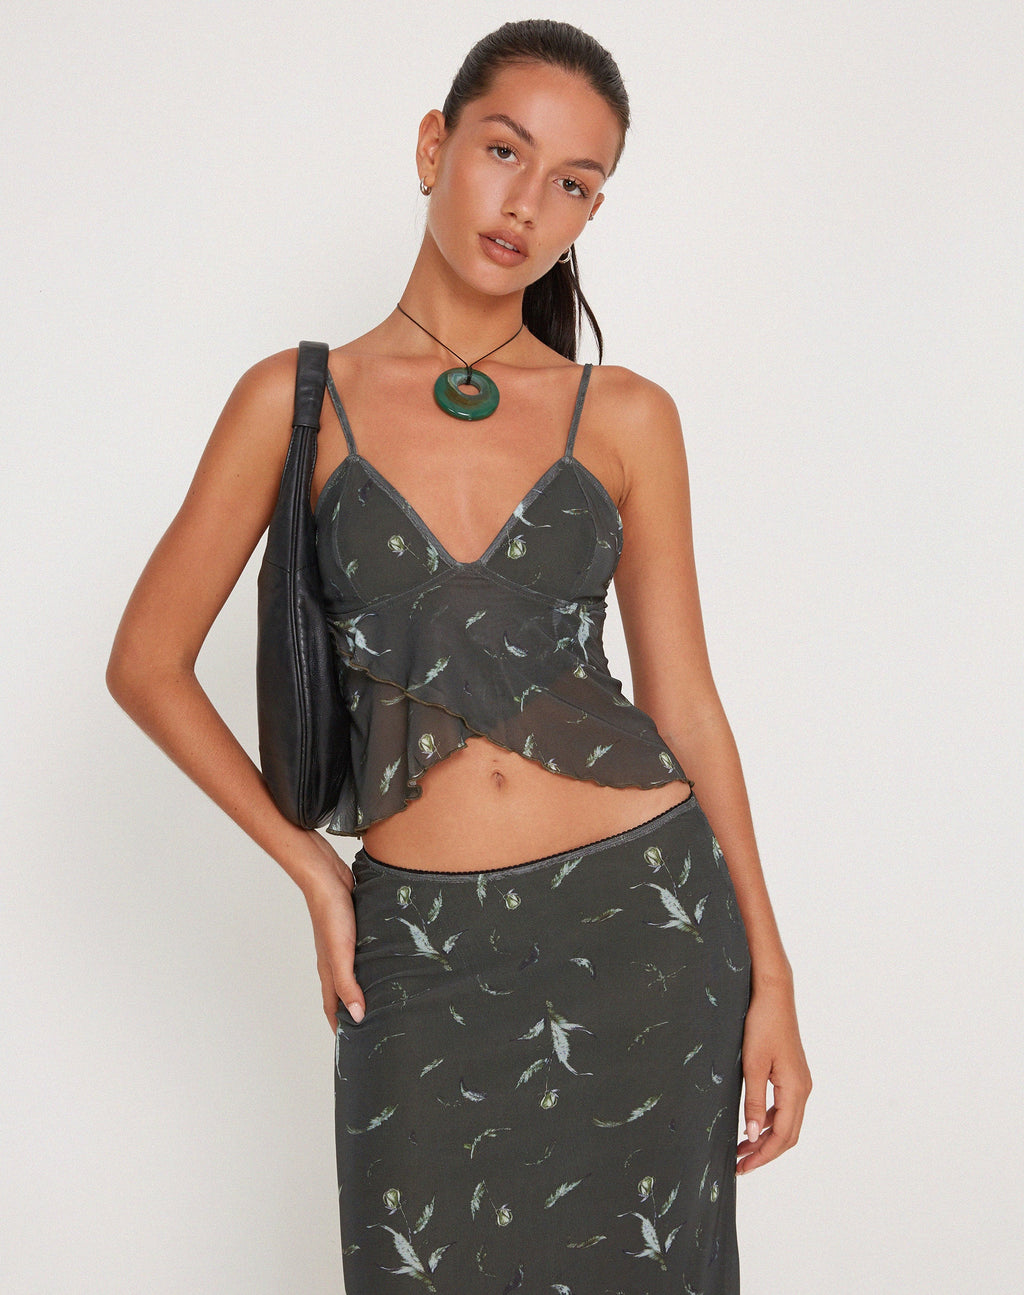 Cojira Mesh Butterfly Top in Floral Khaki Silhouette